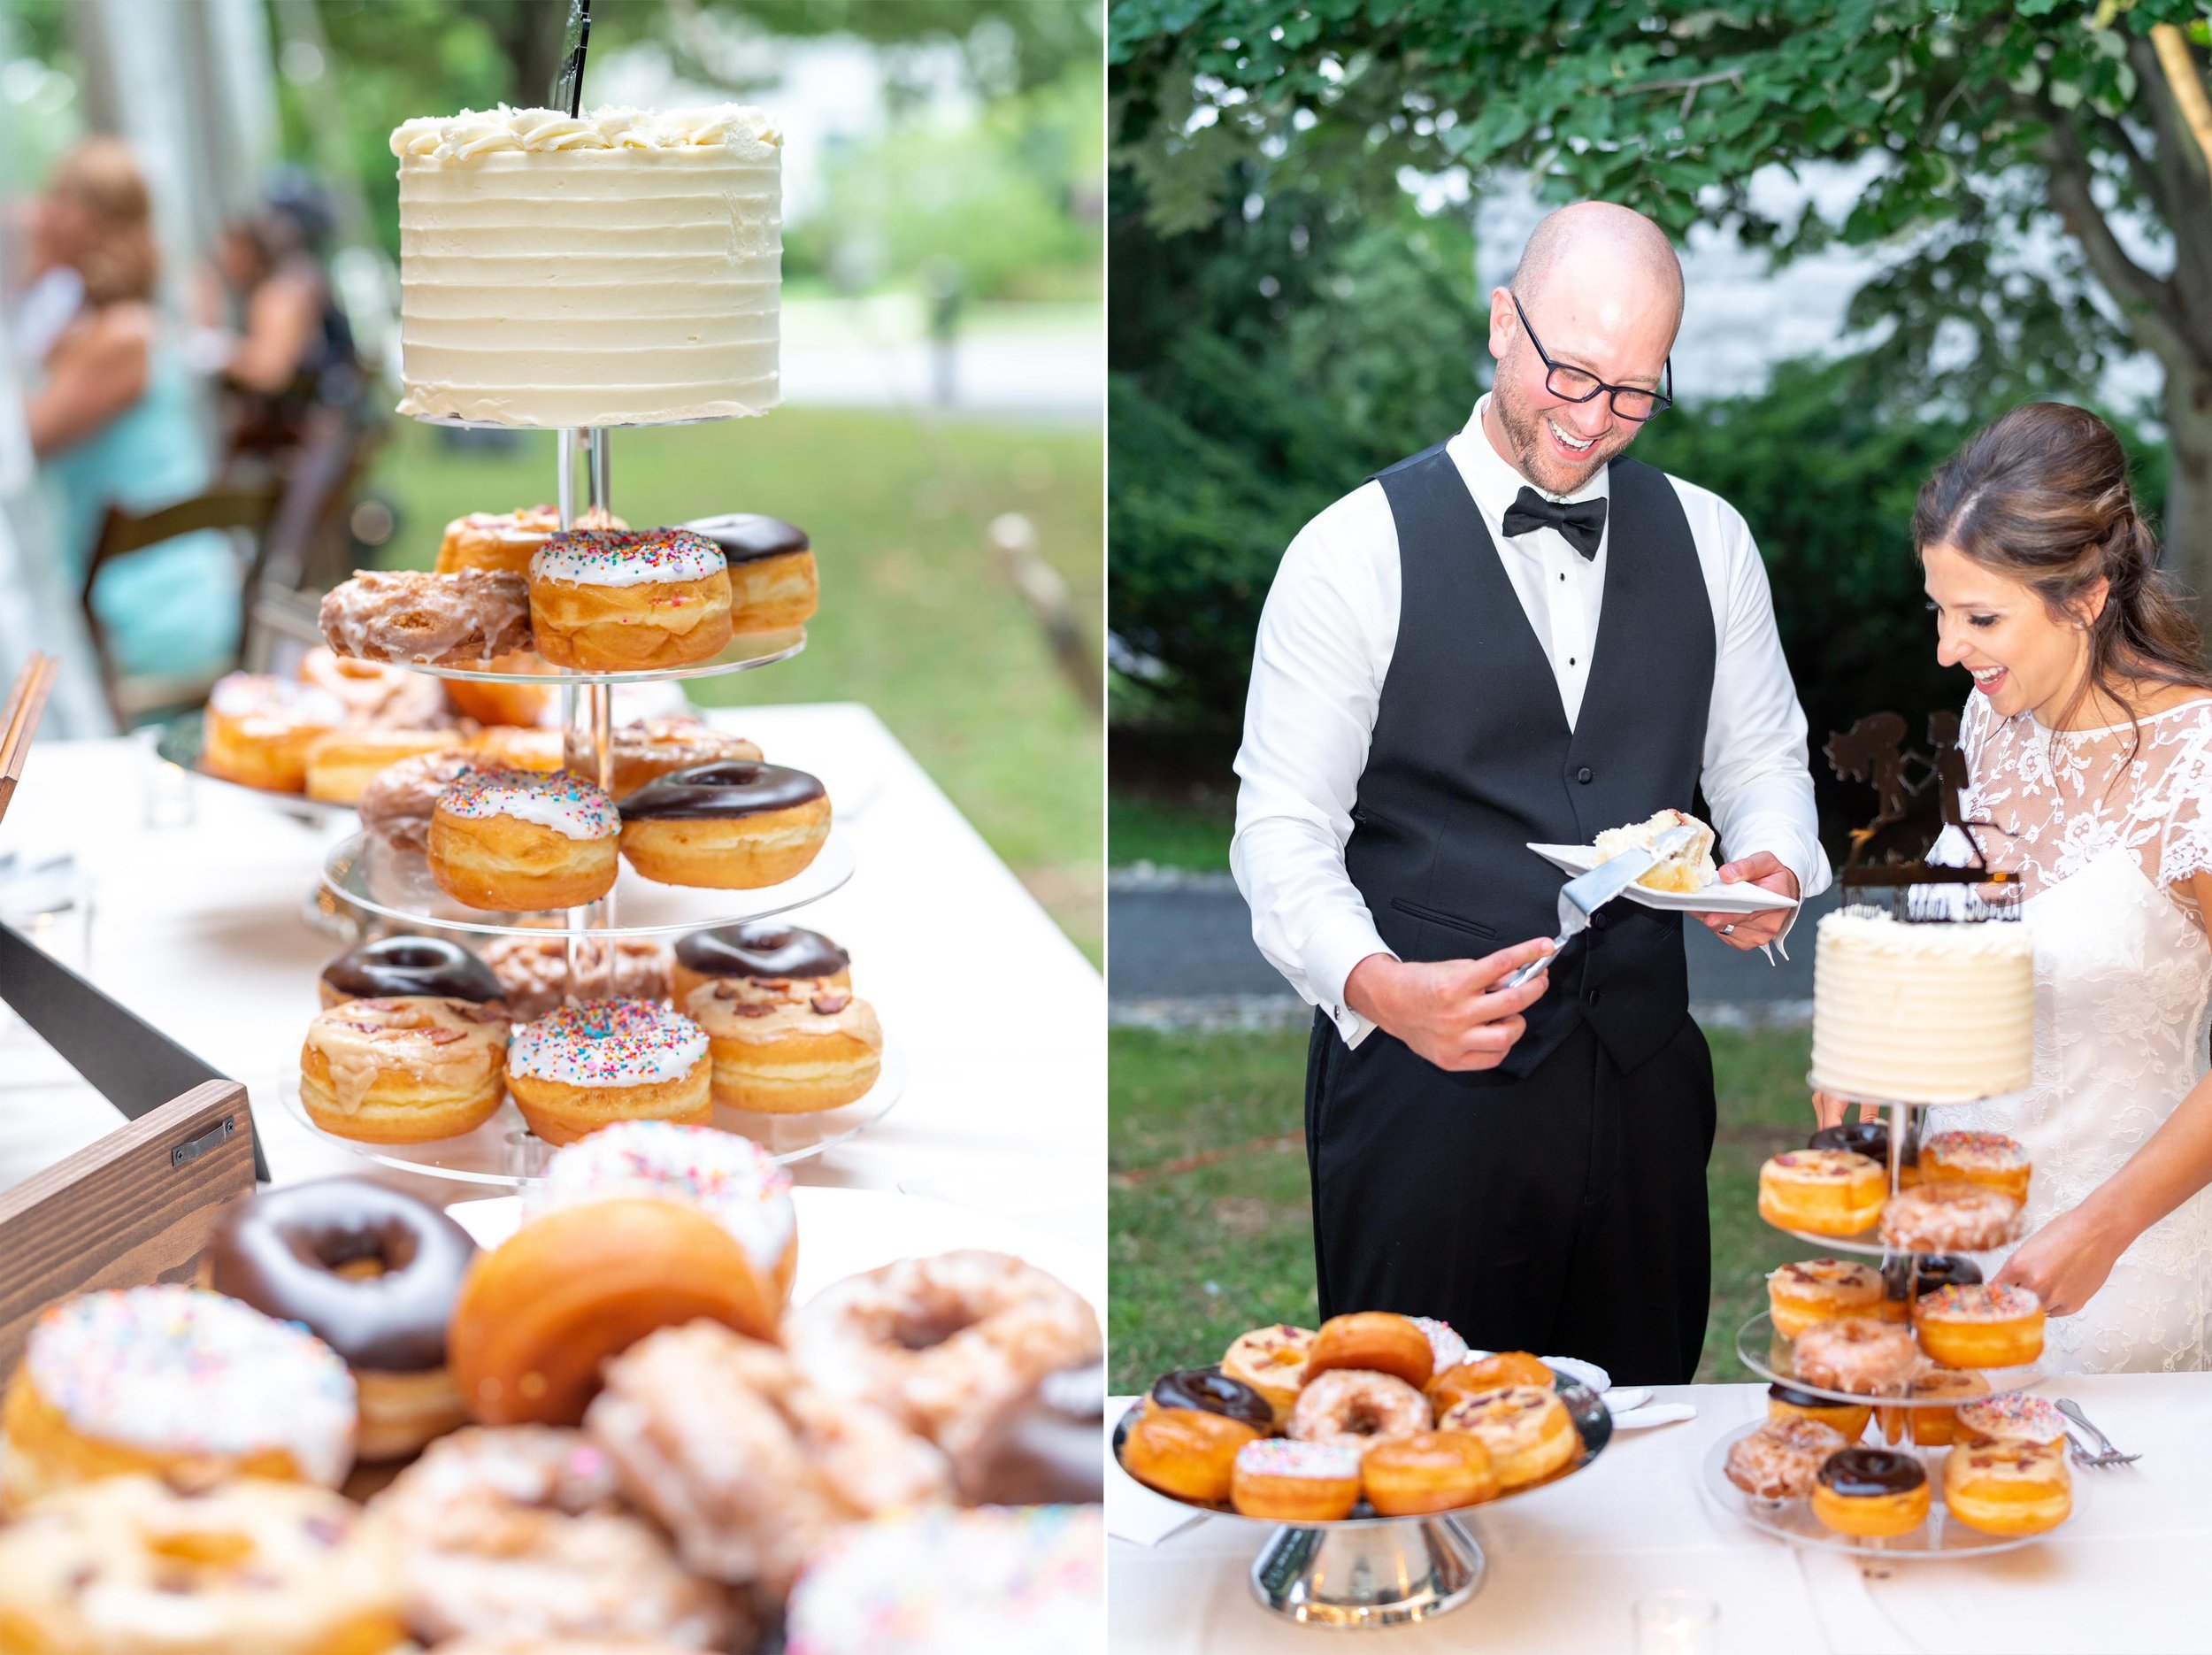 Fun wedding cake idea with donuts on lower tiers and cake on top with diving buddies topper